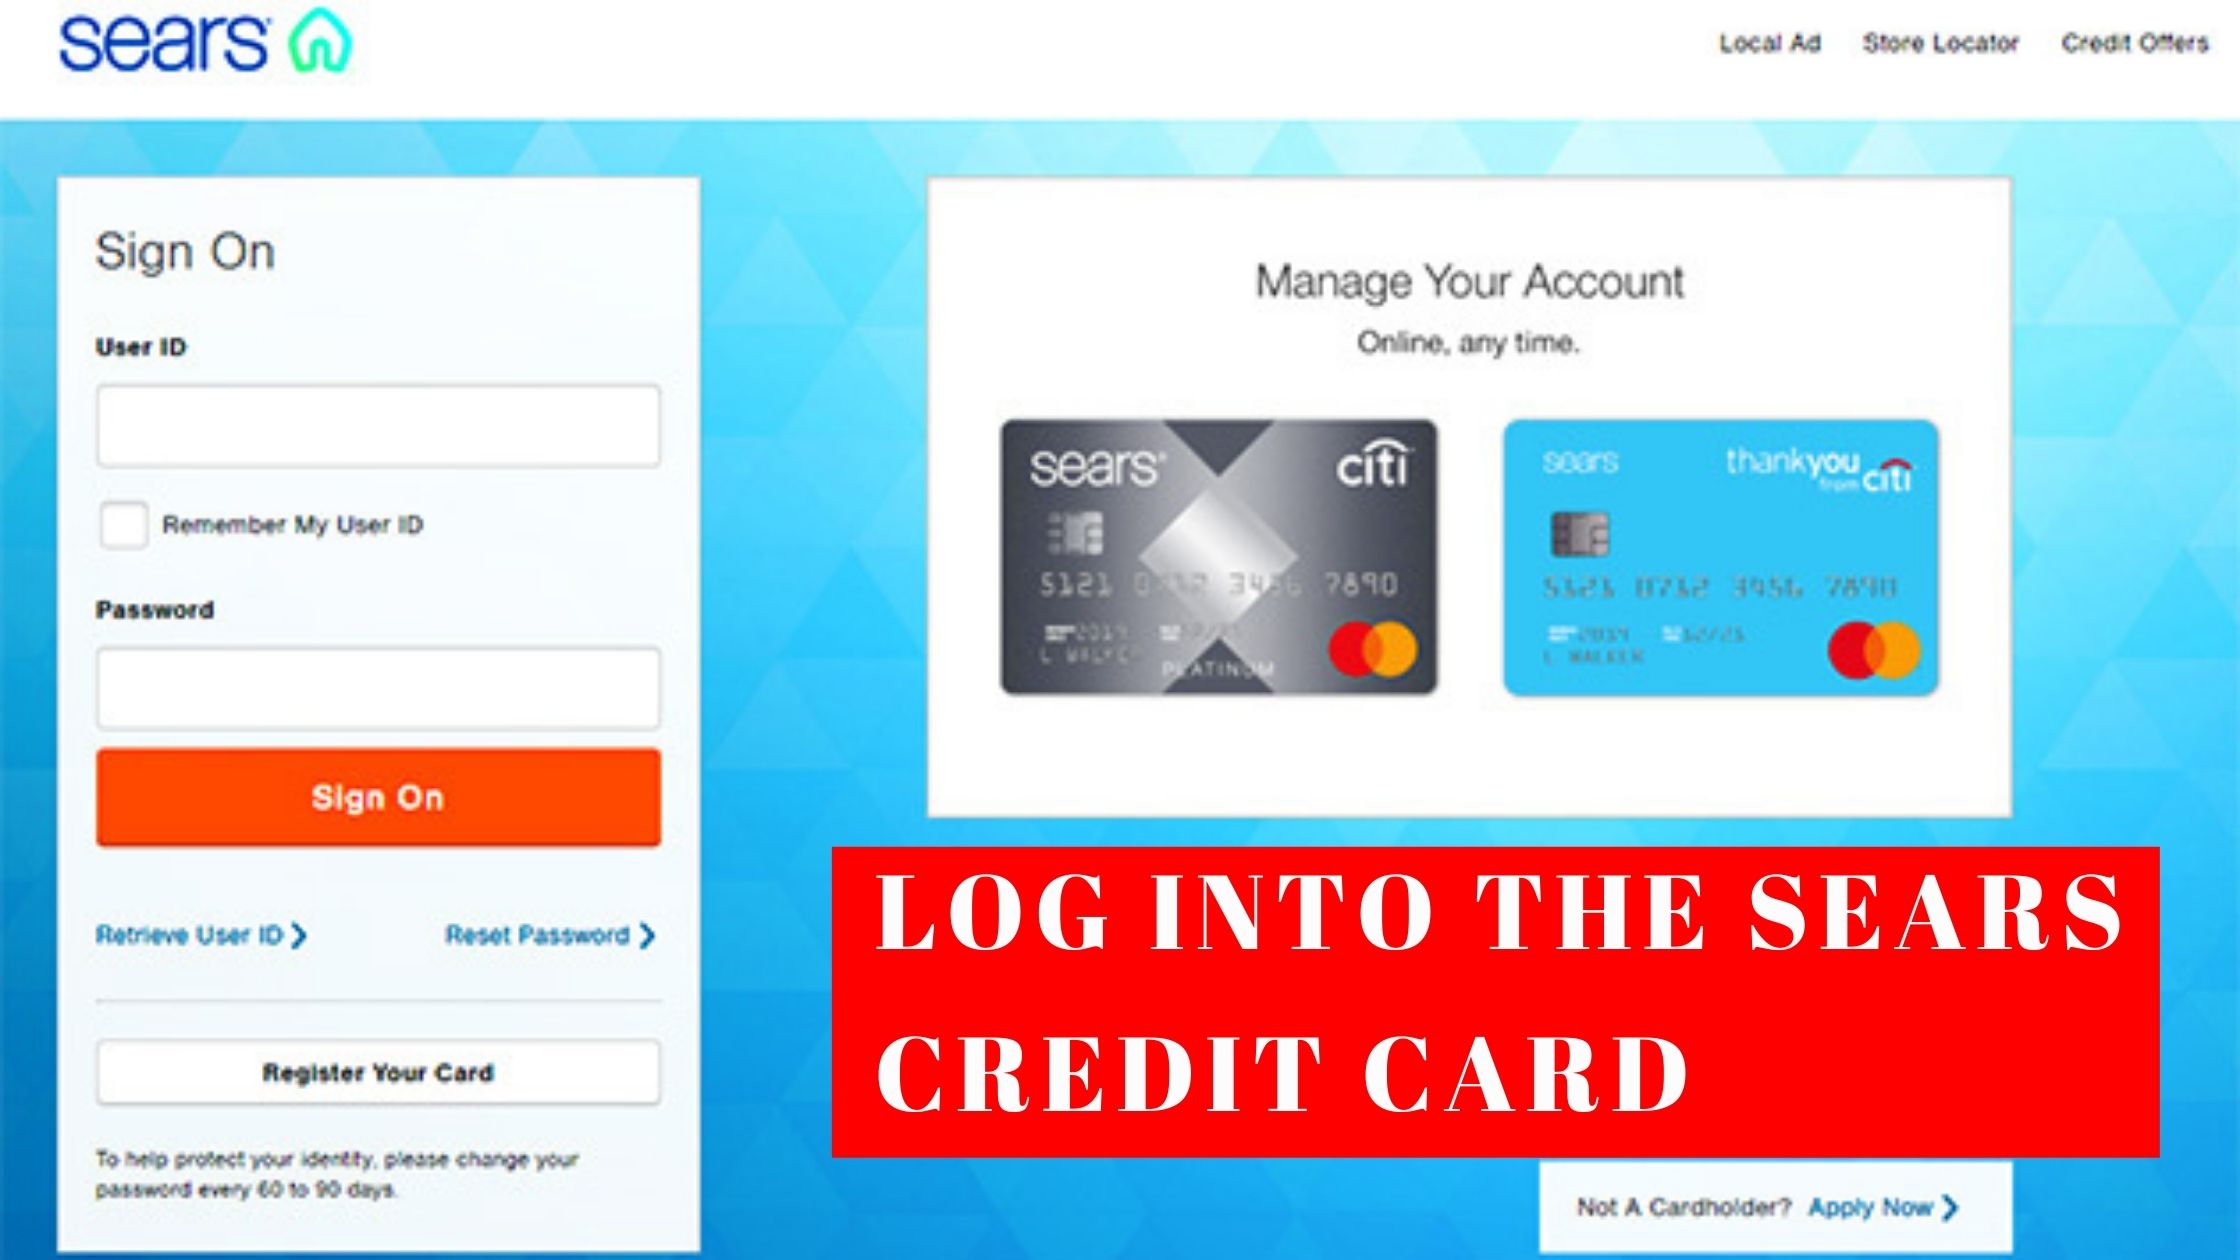 LOG INTO THE SEARS CREDIT CARD